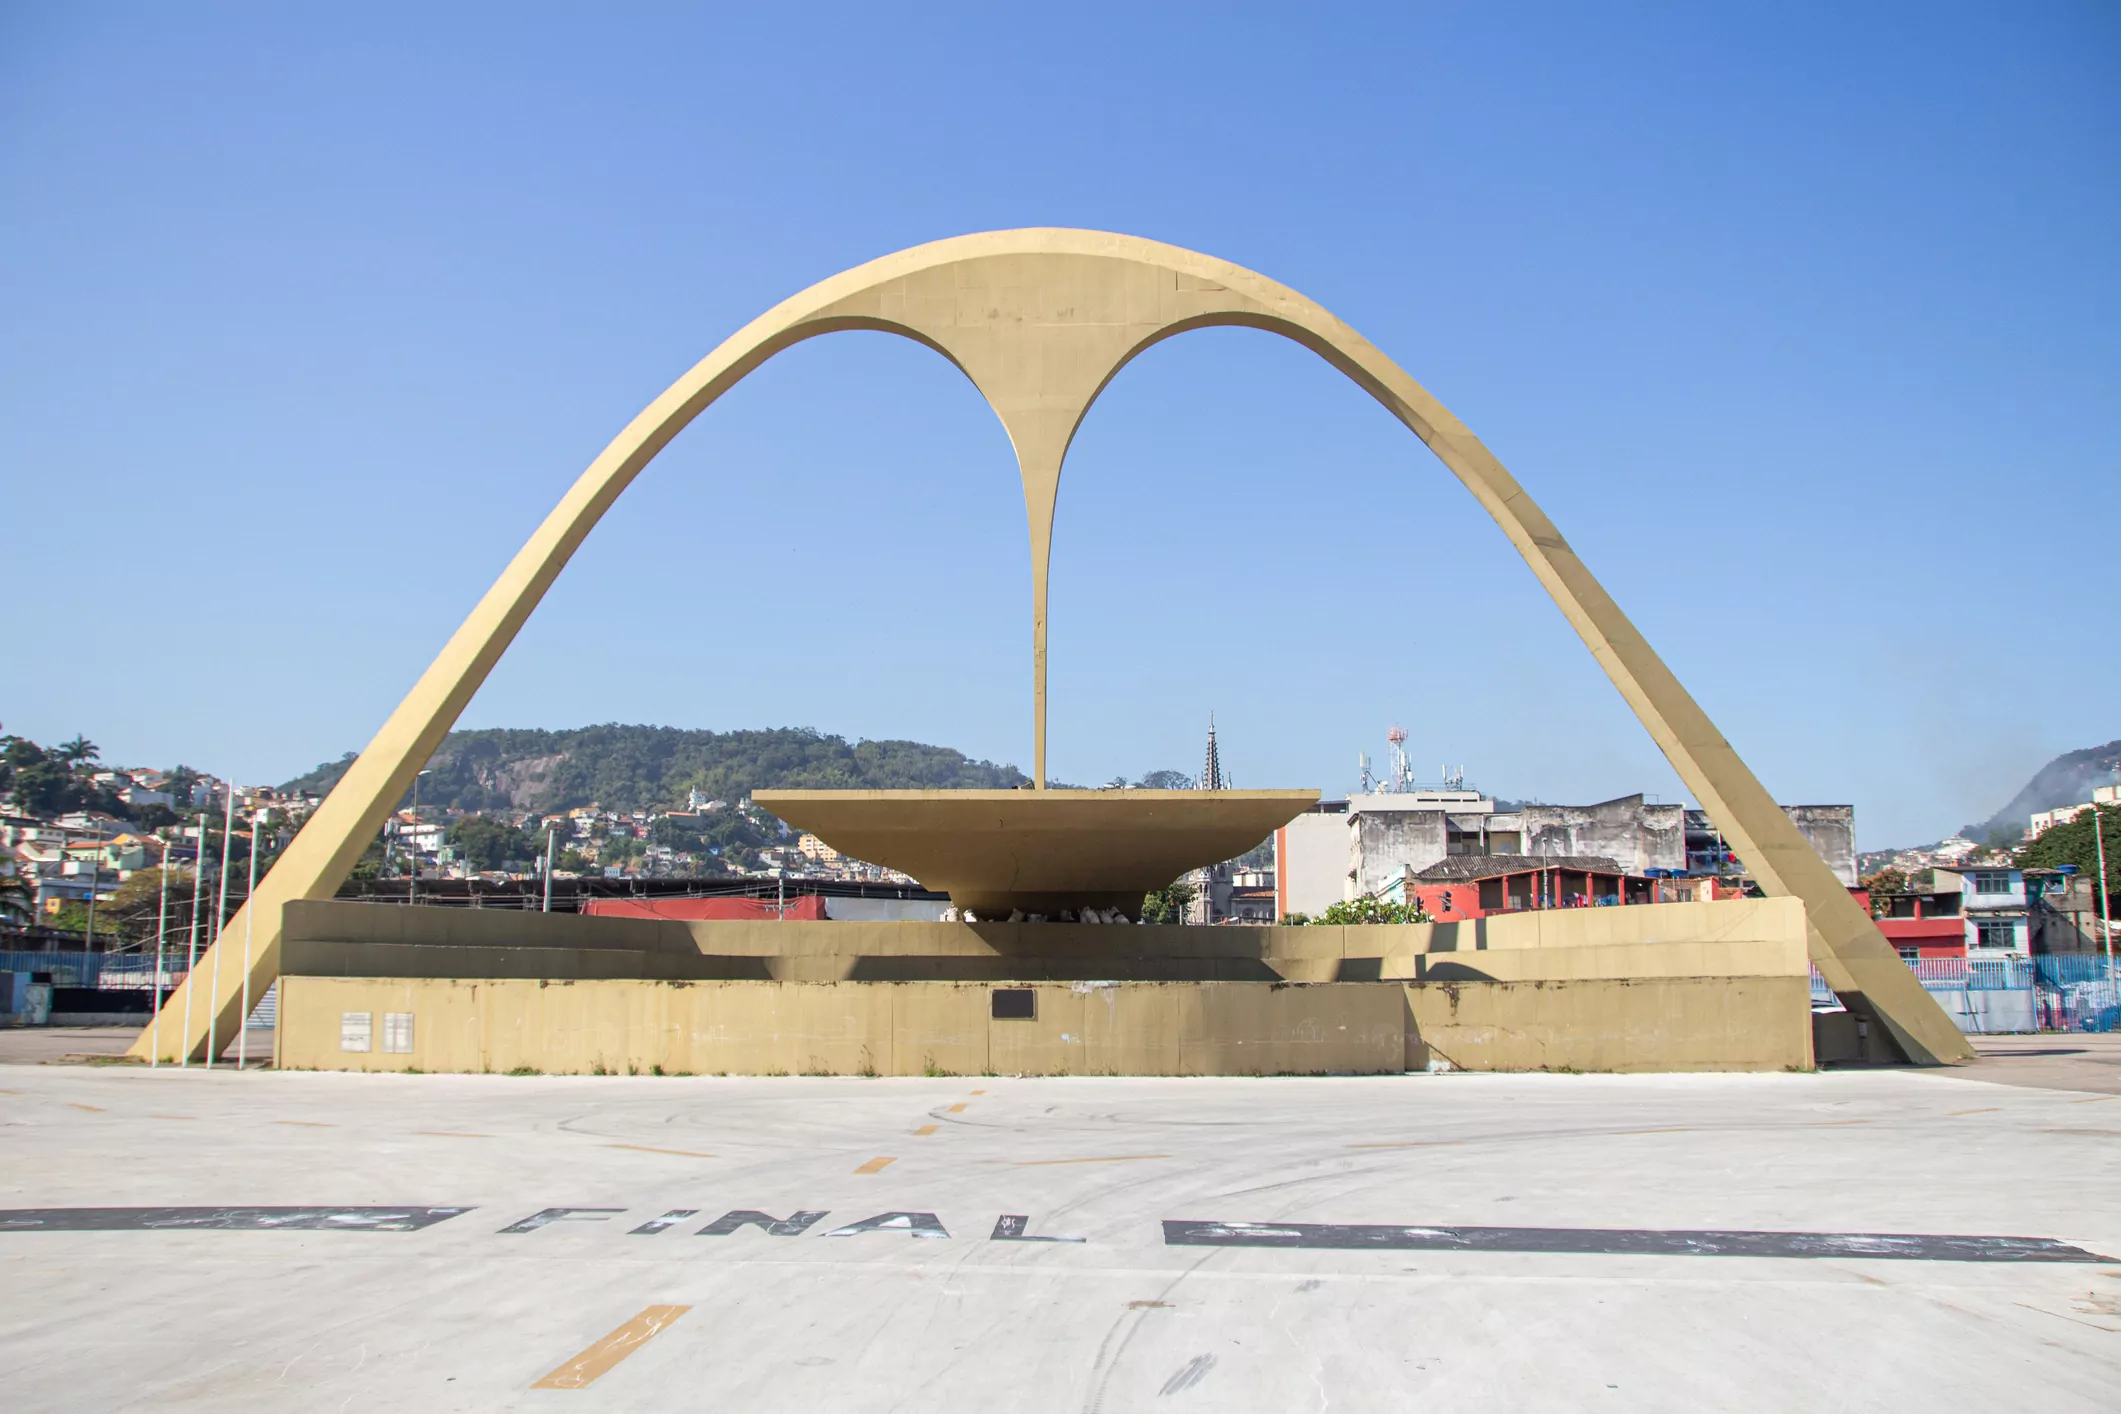 Apotheosis Square in Rio de Janeiro, Brazil - August 31, 2019: It is in the Apotheosis Square that there is a large concrete parabolic arch with a pendant in the center. This arch became a symbol of the Rio Sambadrome and another architectural icon created by architect Oscar Niemeyer.